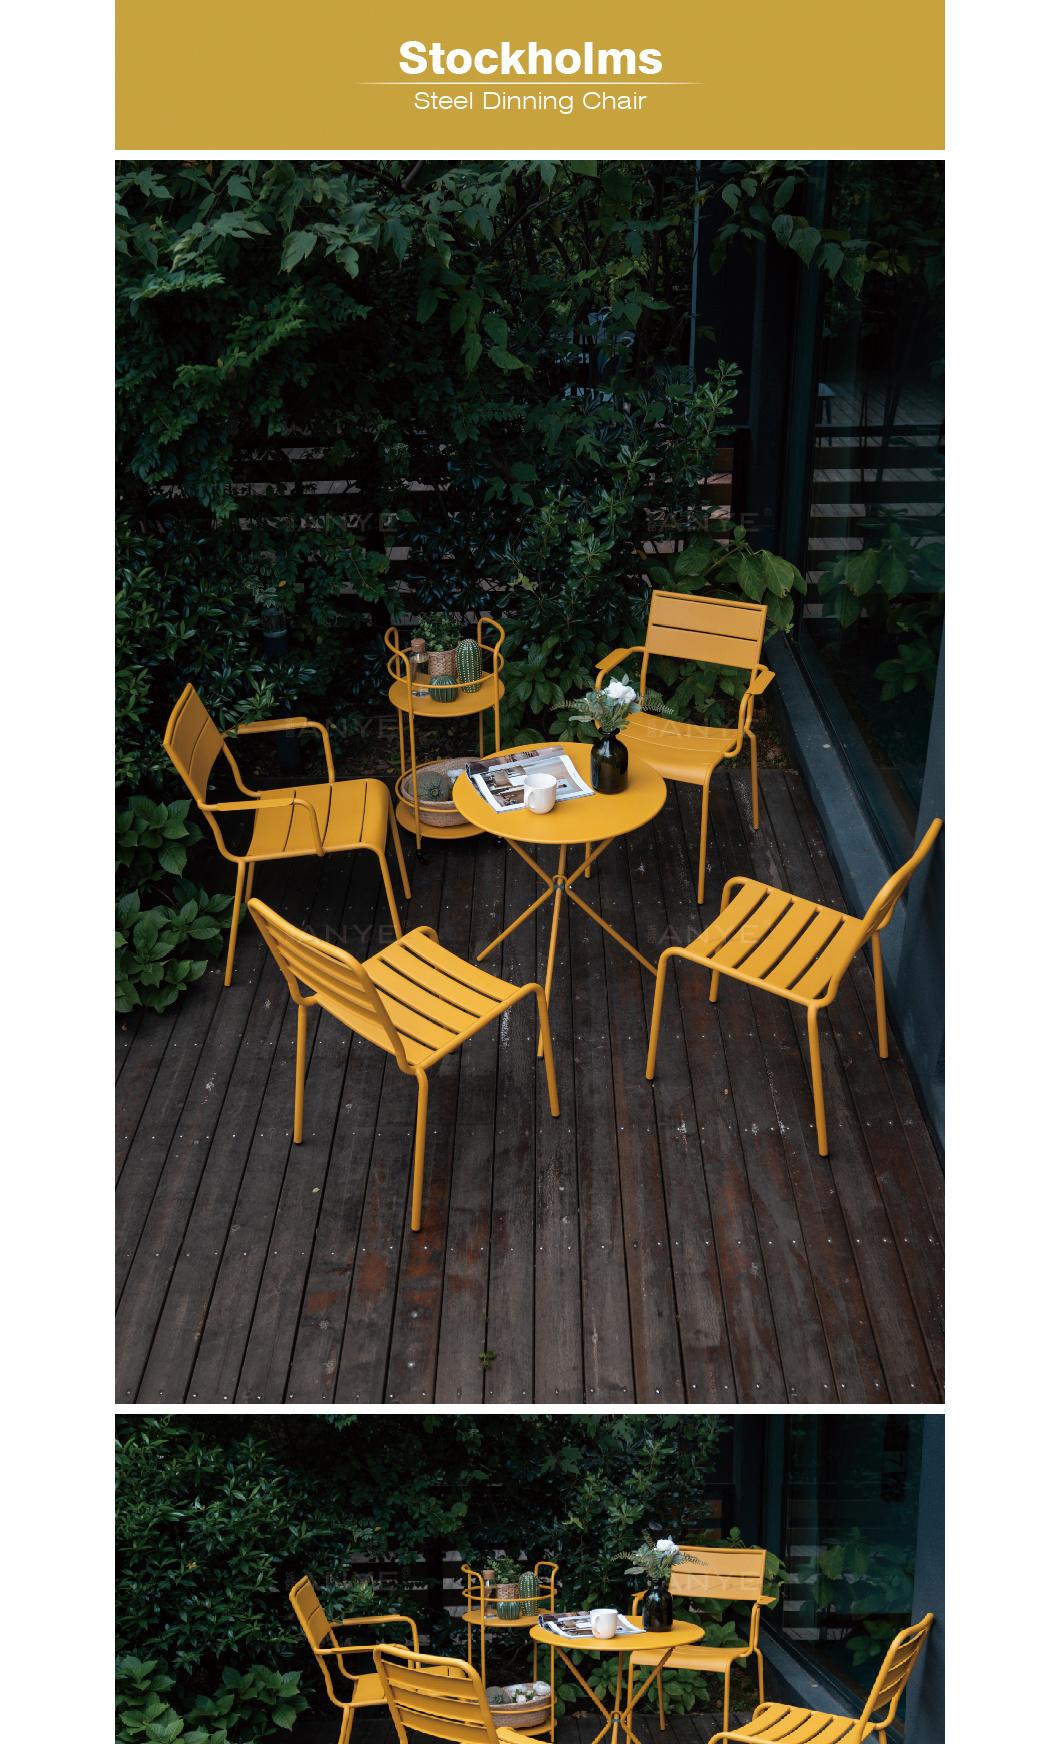 Outdoor Rust Resistant Yellow Casual Wedding Furniture Stackable Banquet Dining Chair for Commercial Rental Business